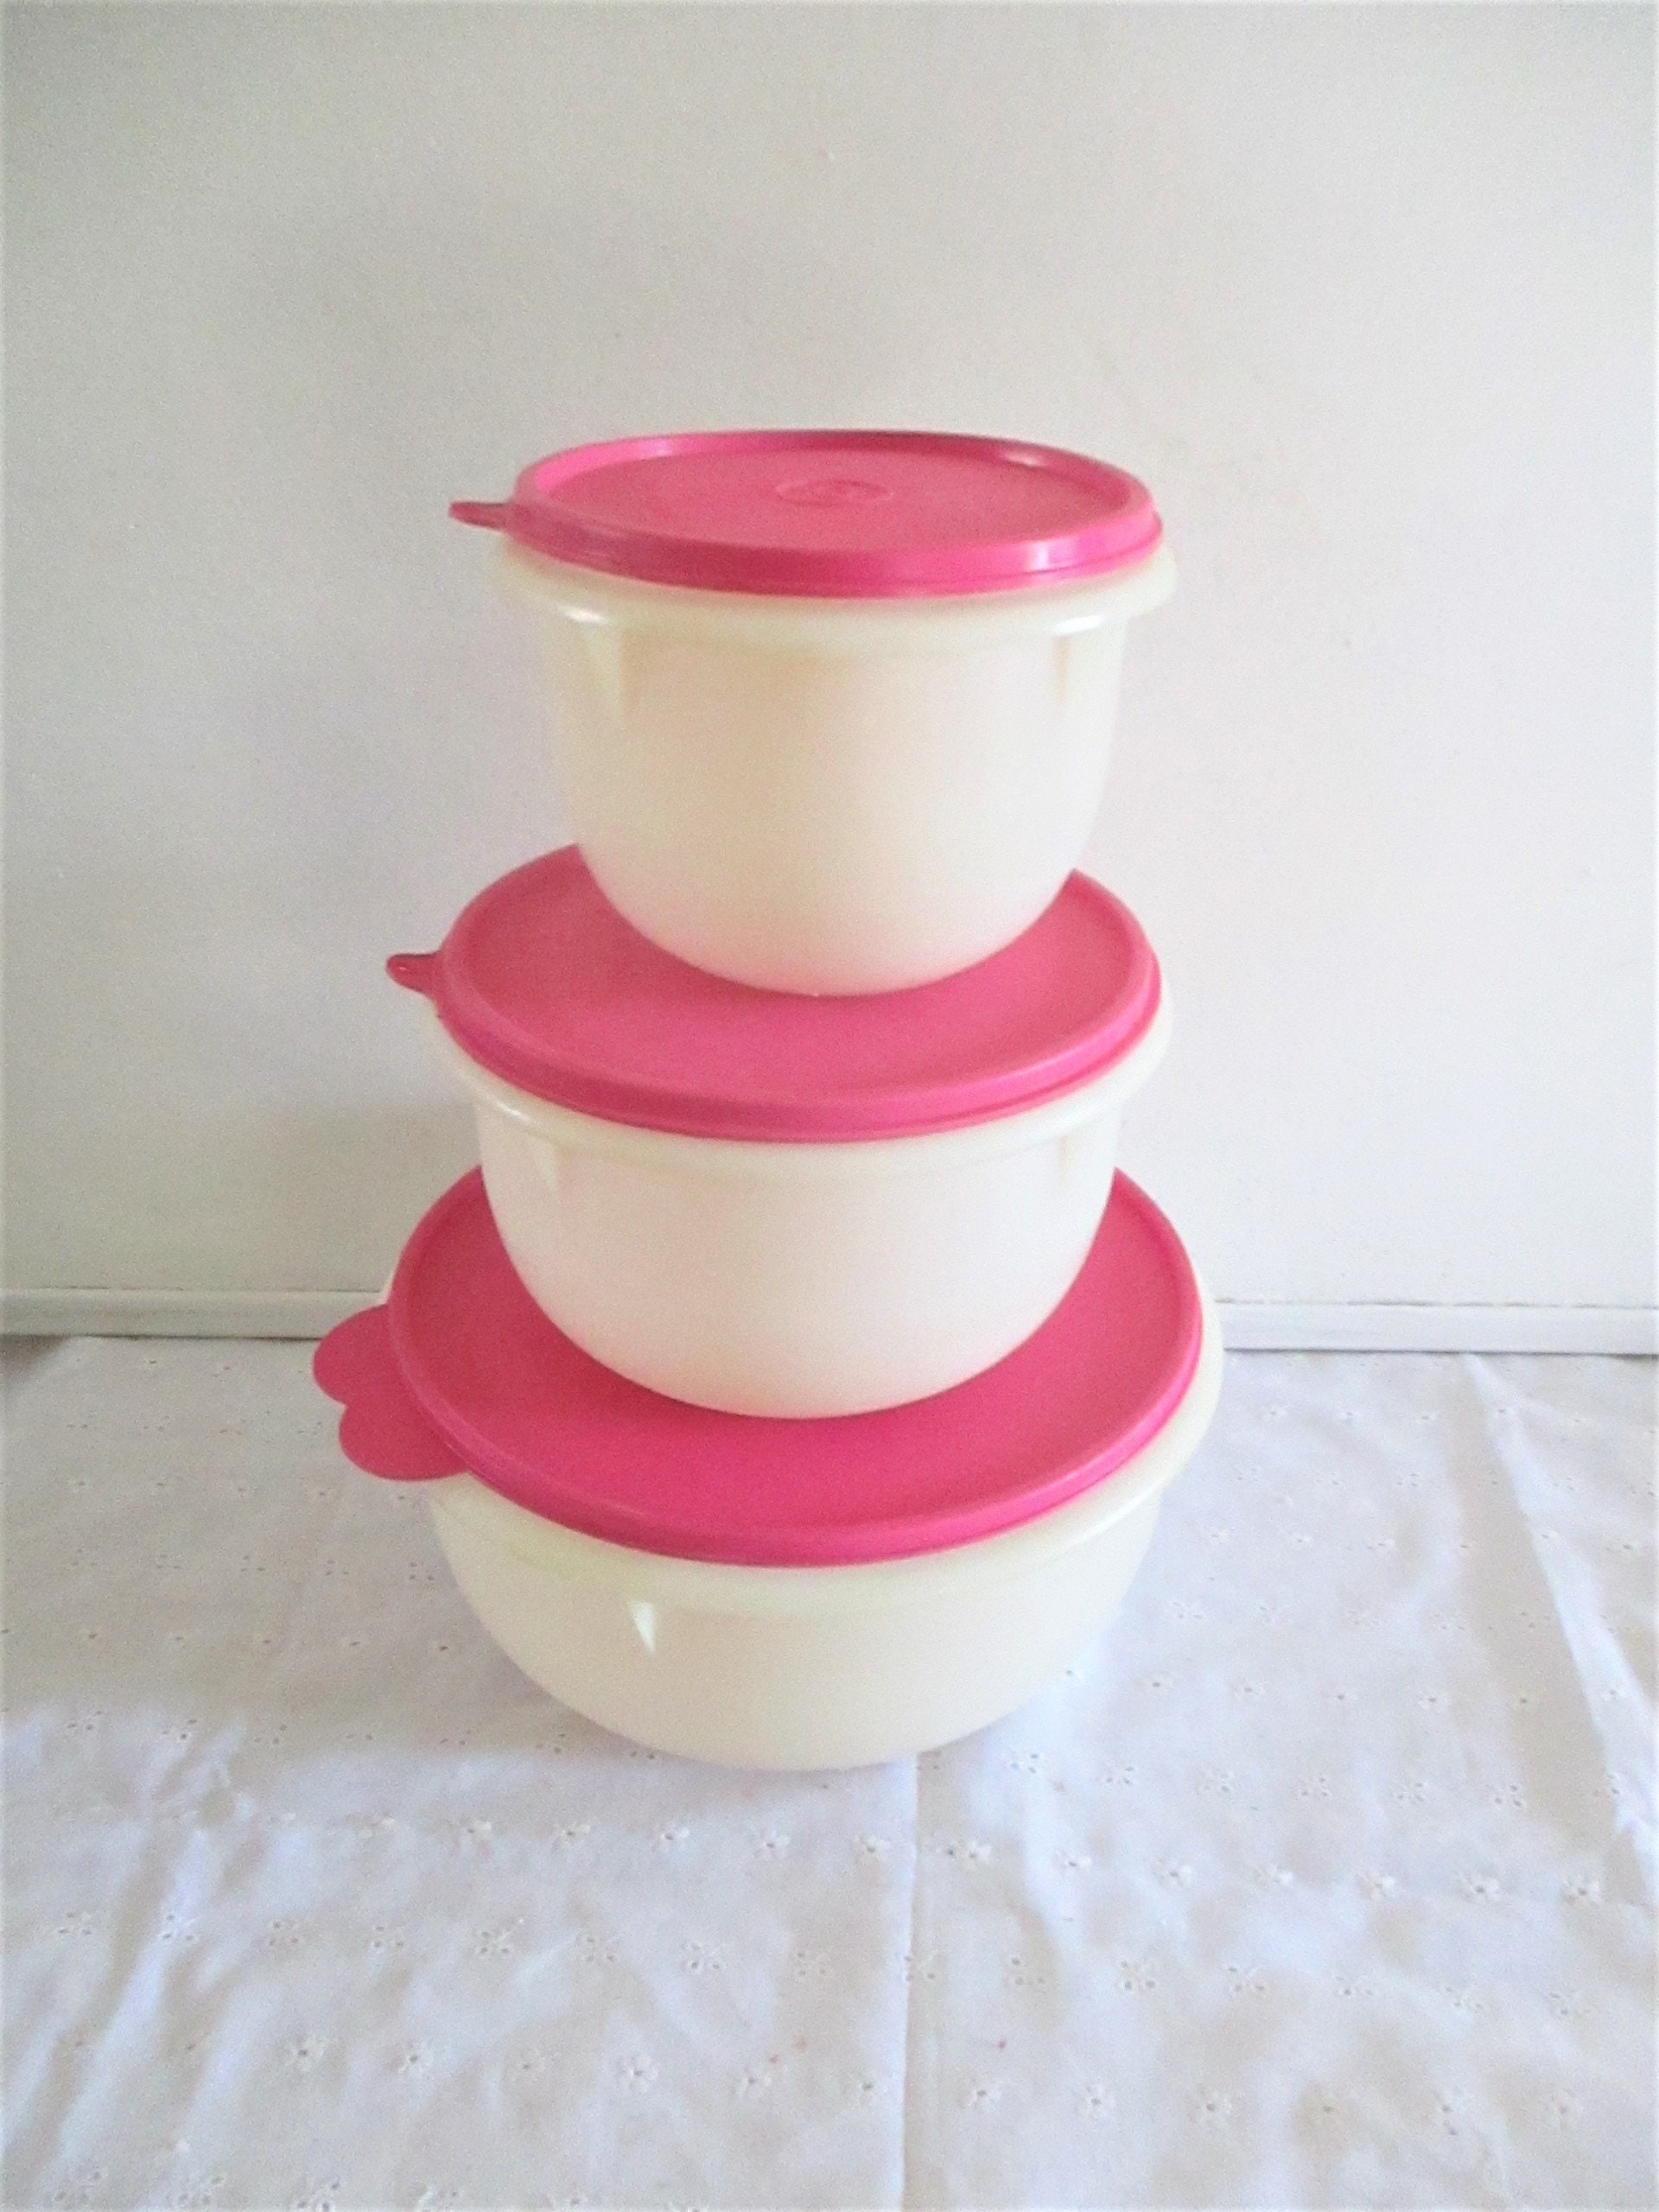  Tupperware Giant Smidget Half Size Snack Cup Small Bowl Set  Shades of Pink : Home & Kitchen